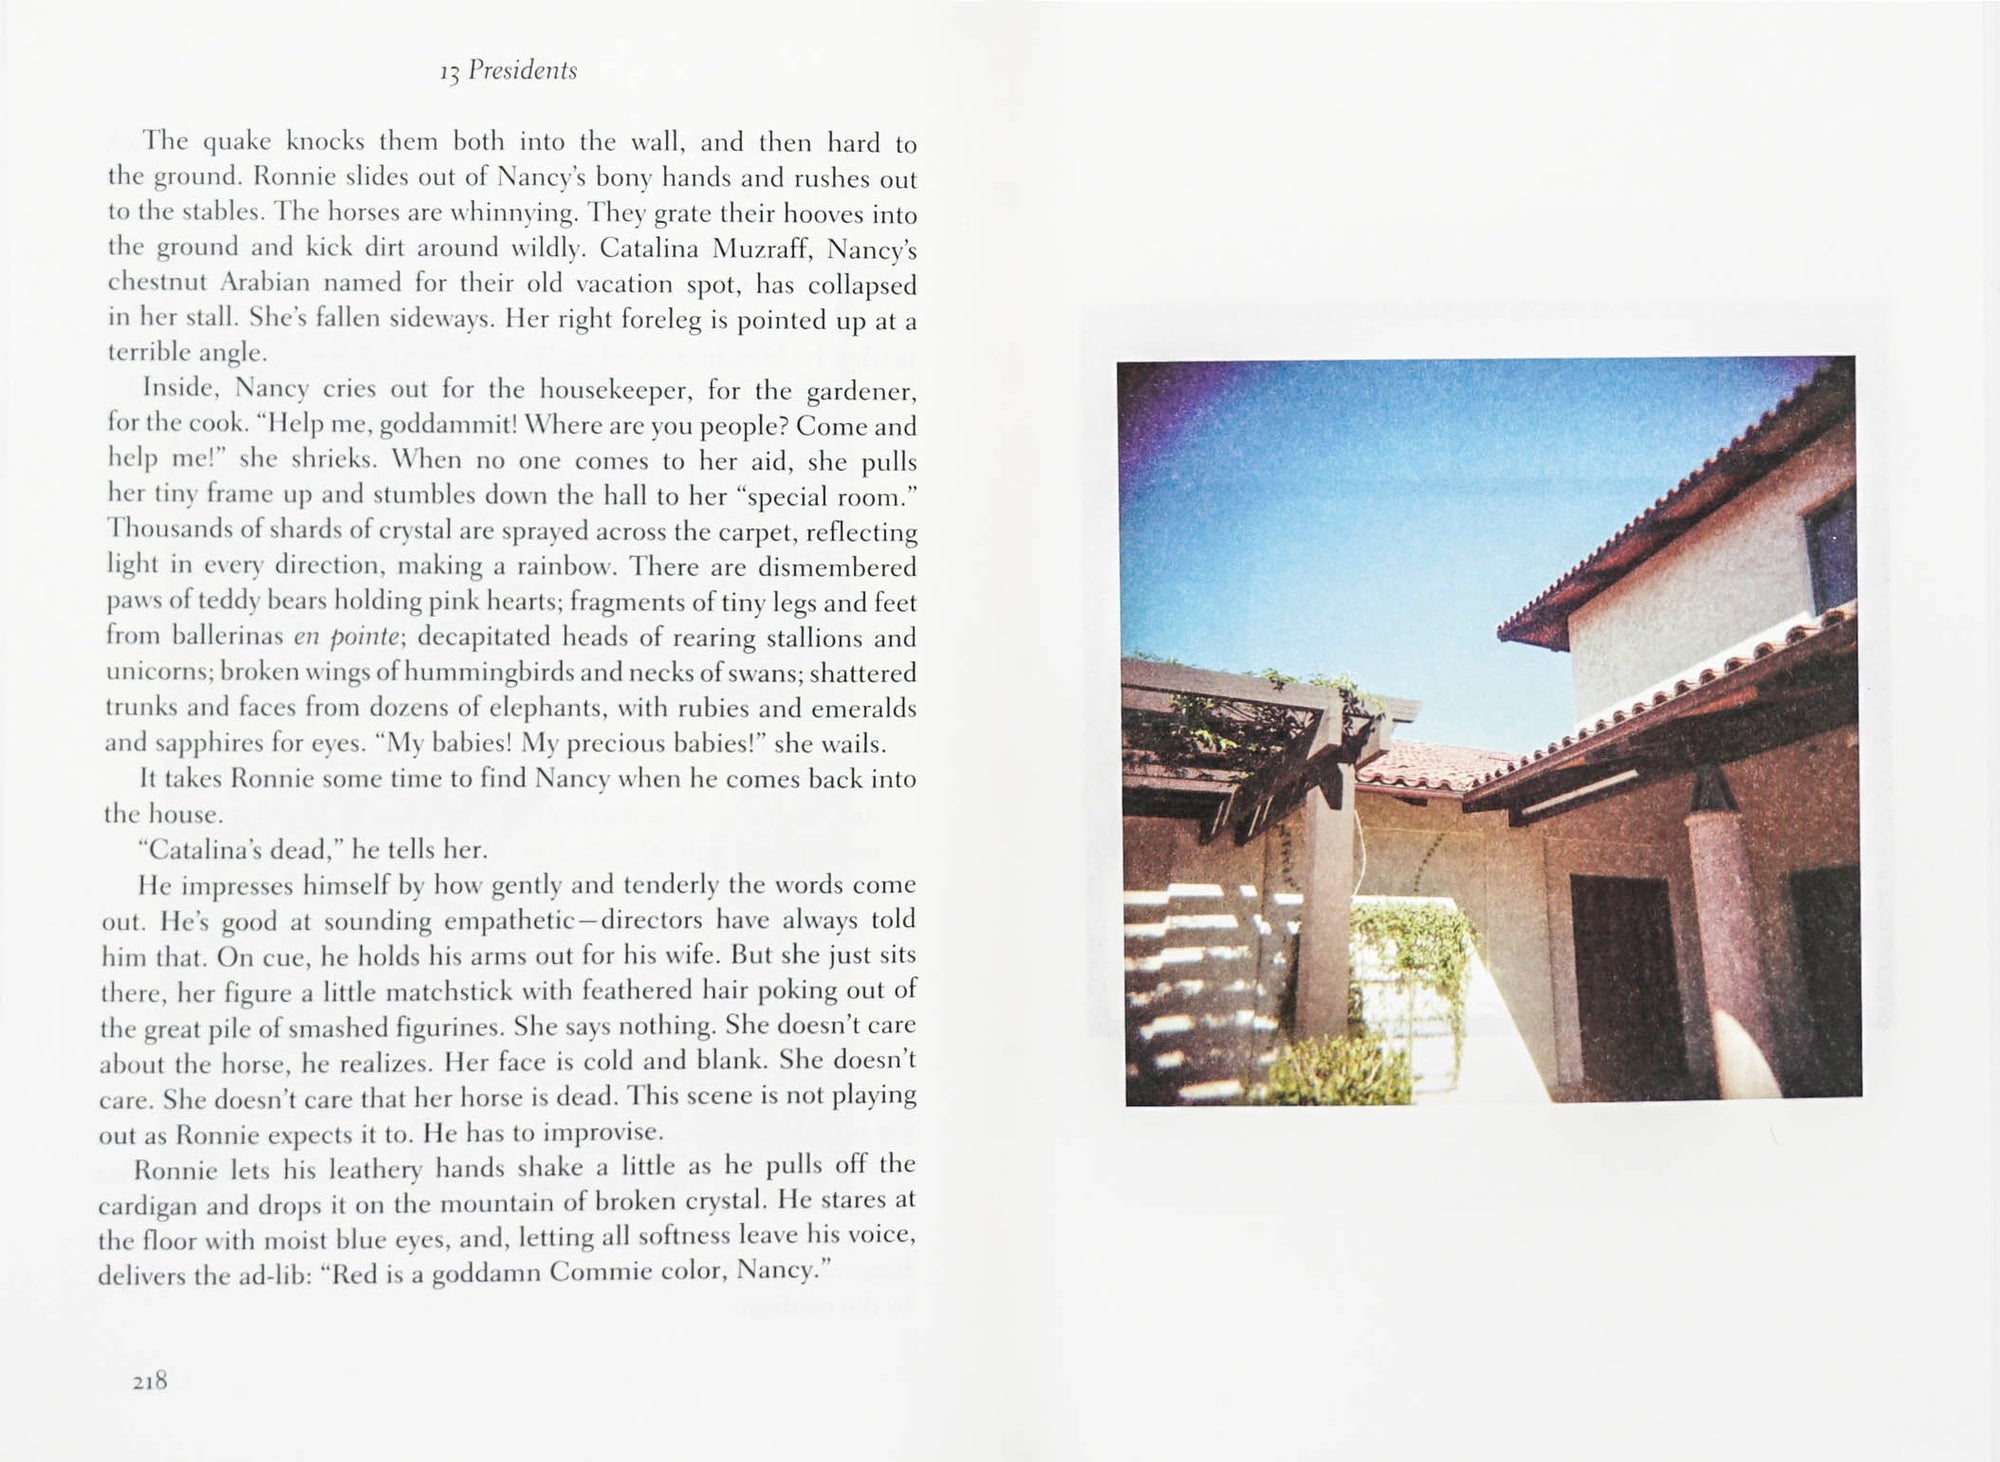 Book spread with black serif type on the left and a photograph of a house on the right